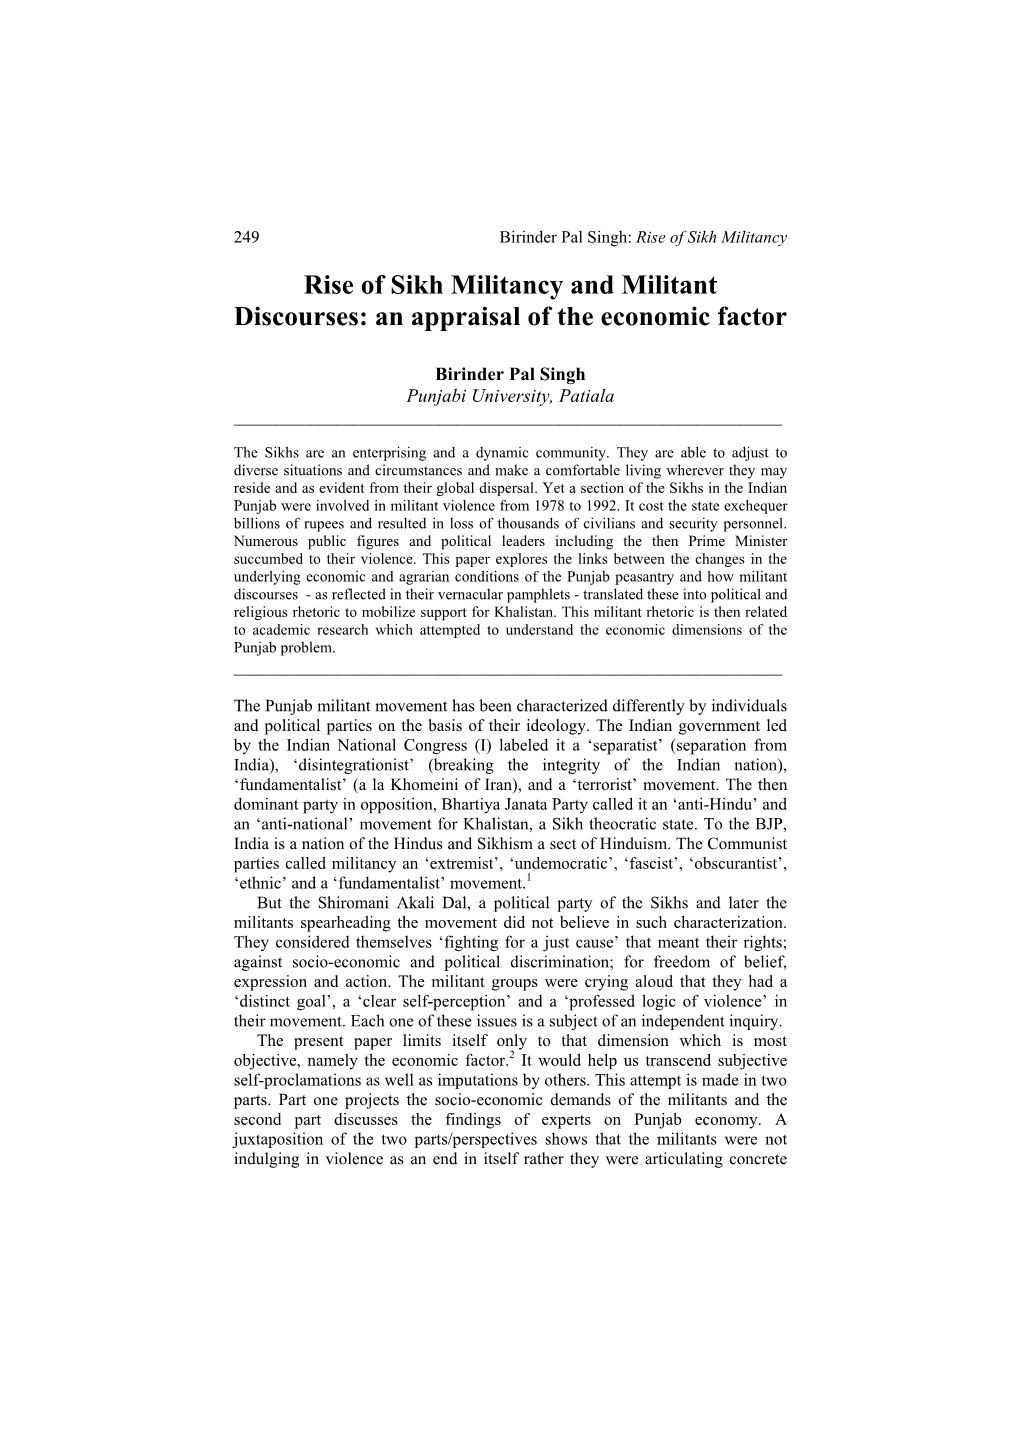 Rise of Sikh Militancy and Militant Discourses: an Appraisal of the Economic Factor